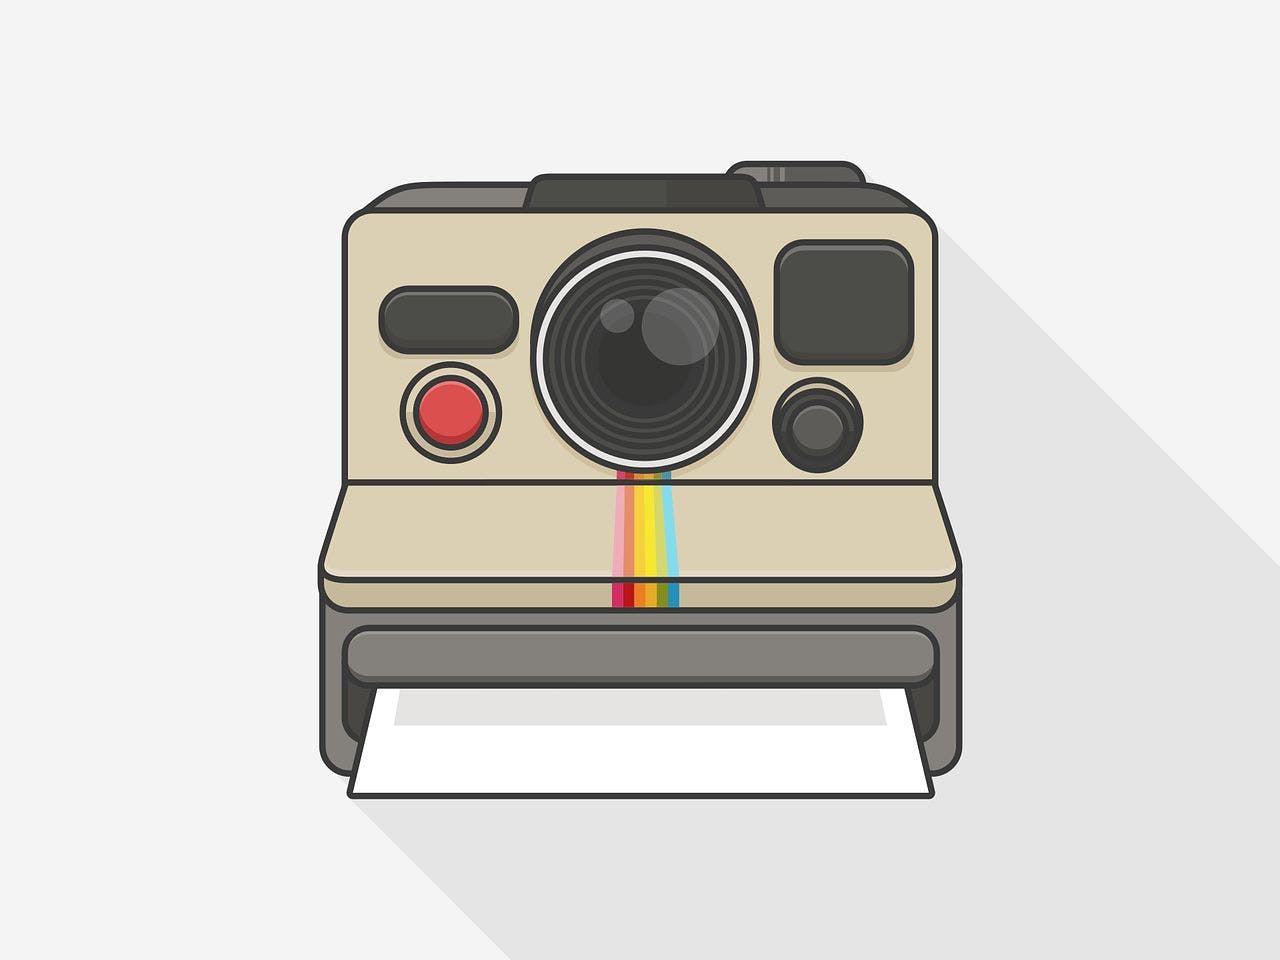 featured image - Instagram Marketing: 3 Common Mistakes to Avoid